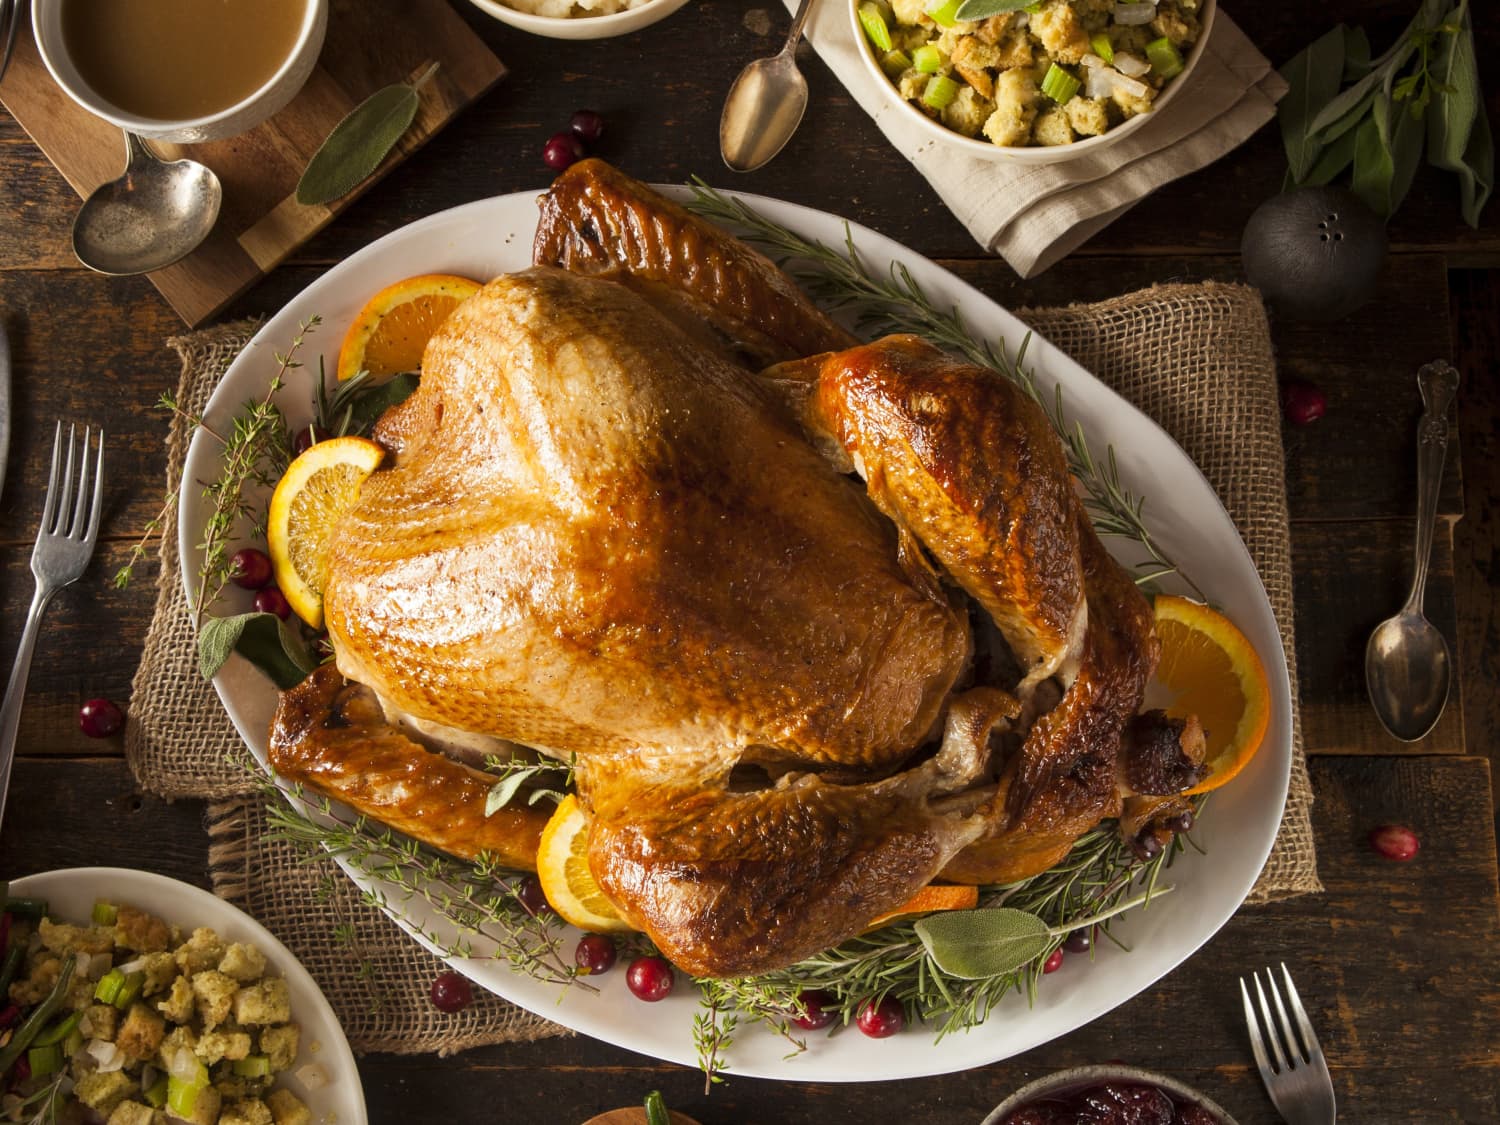 Make-Ahead Tips for Your Easiest Thanksgiving Yet